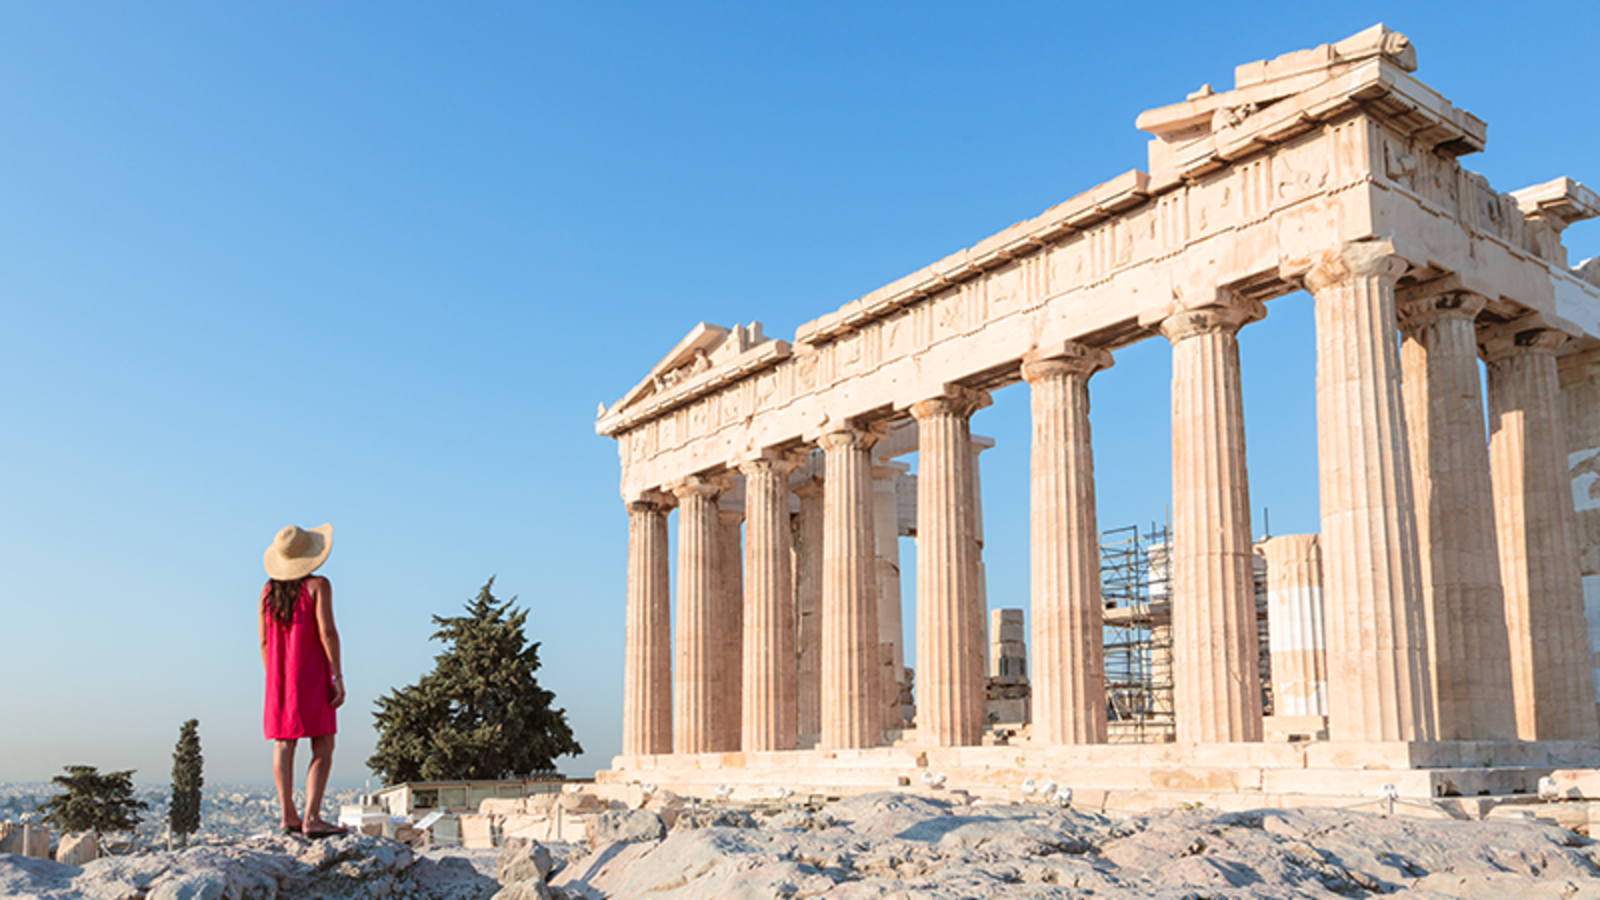 The Acropolis of Athens, framed by a bright blue sky